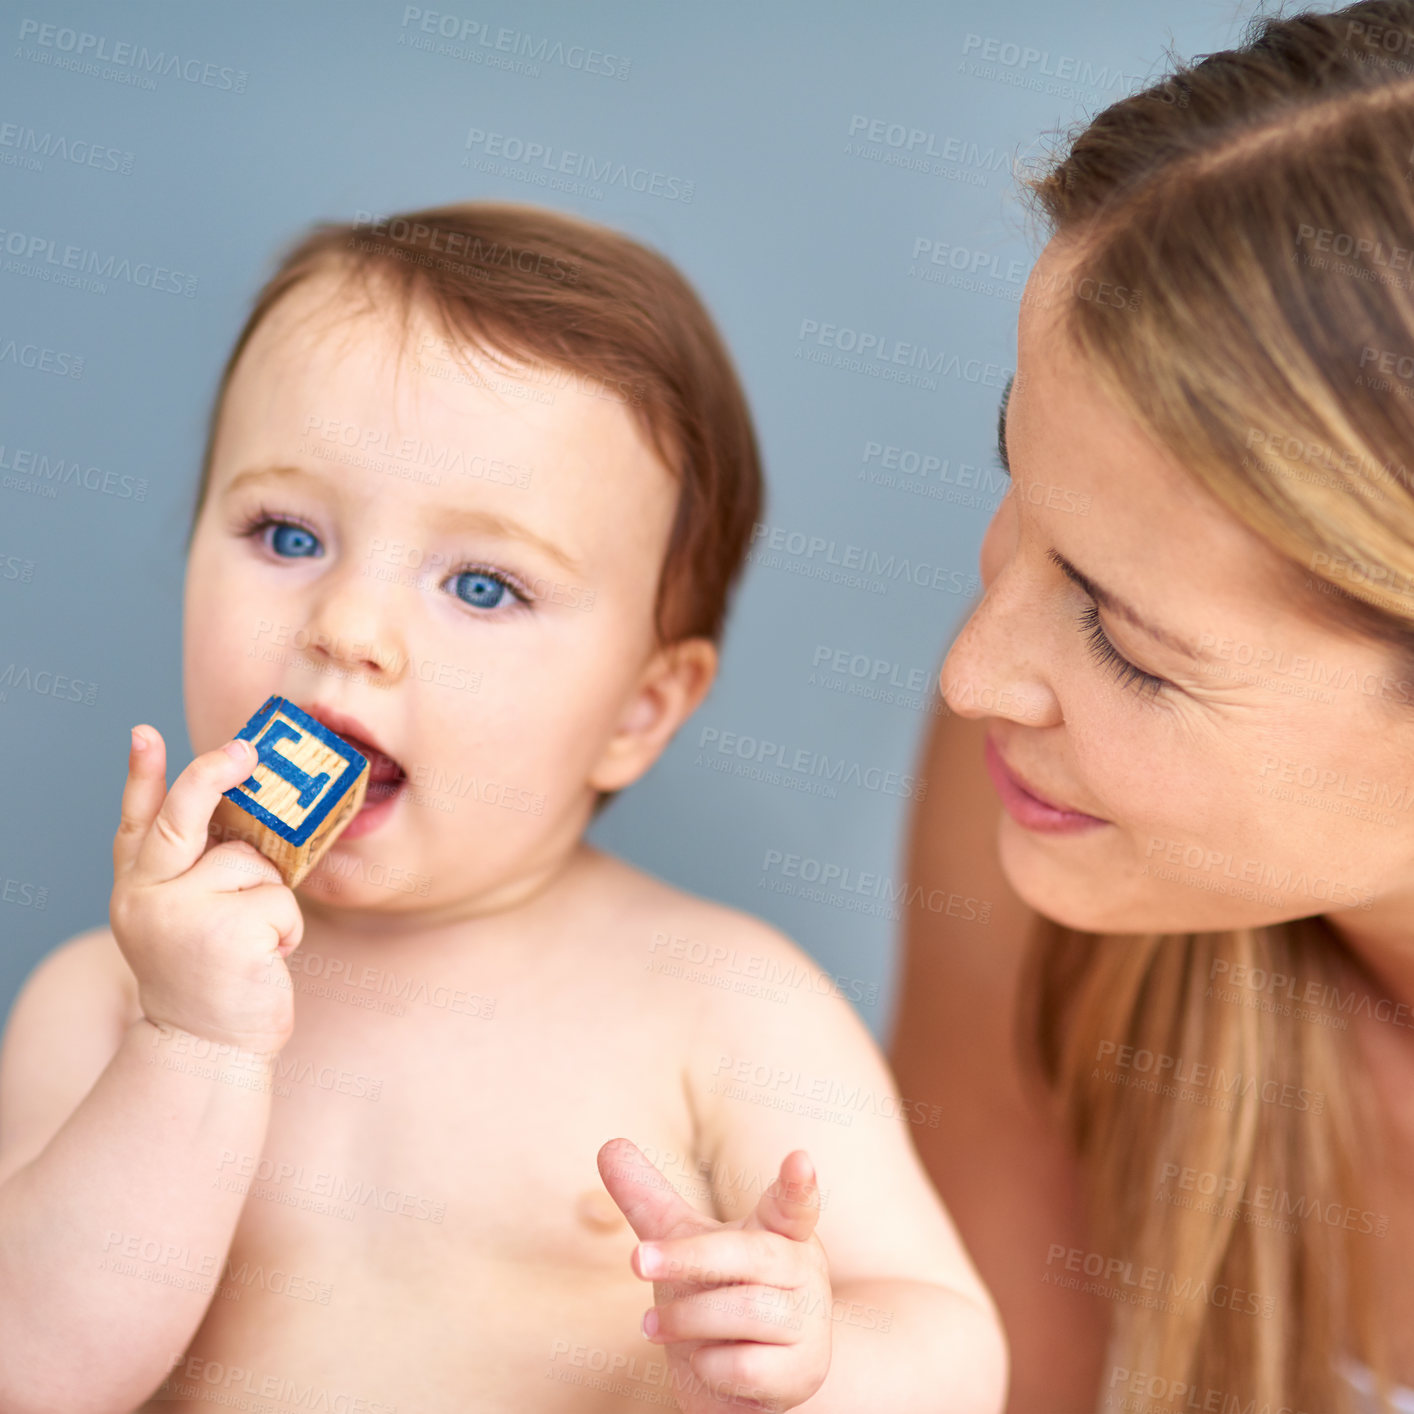 Buy stock photo Shot of an adorable baby girl biting a wooden block while her mother looks on